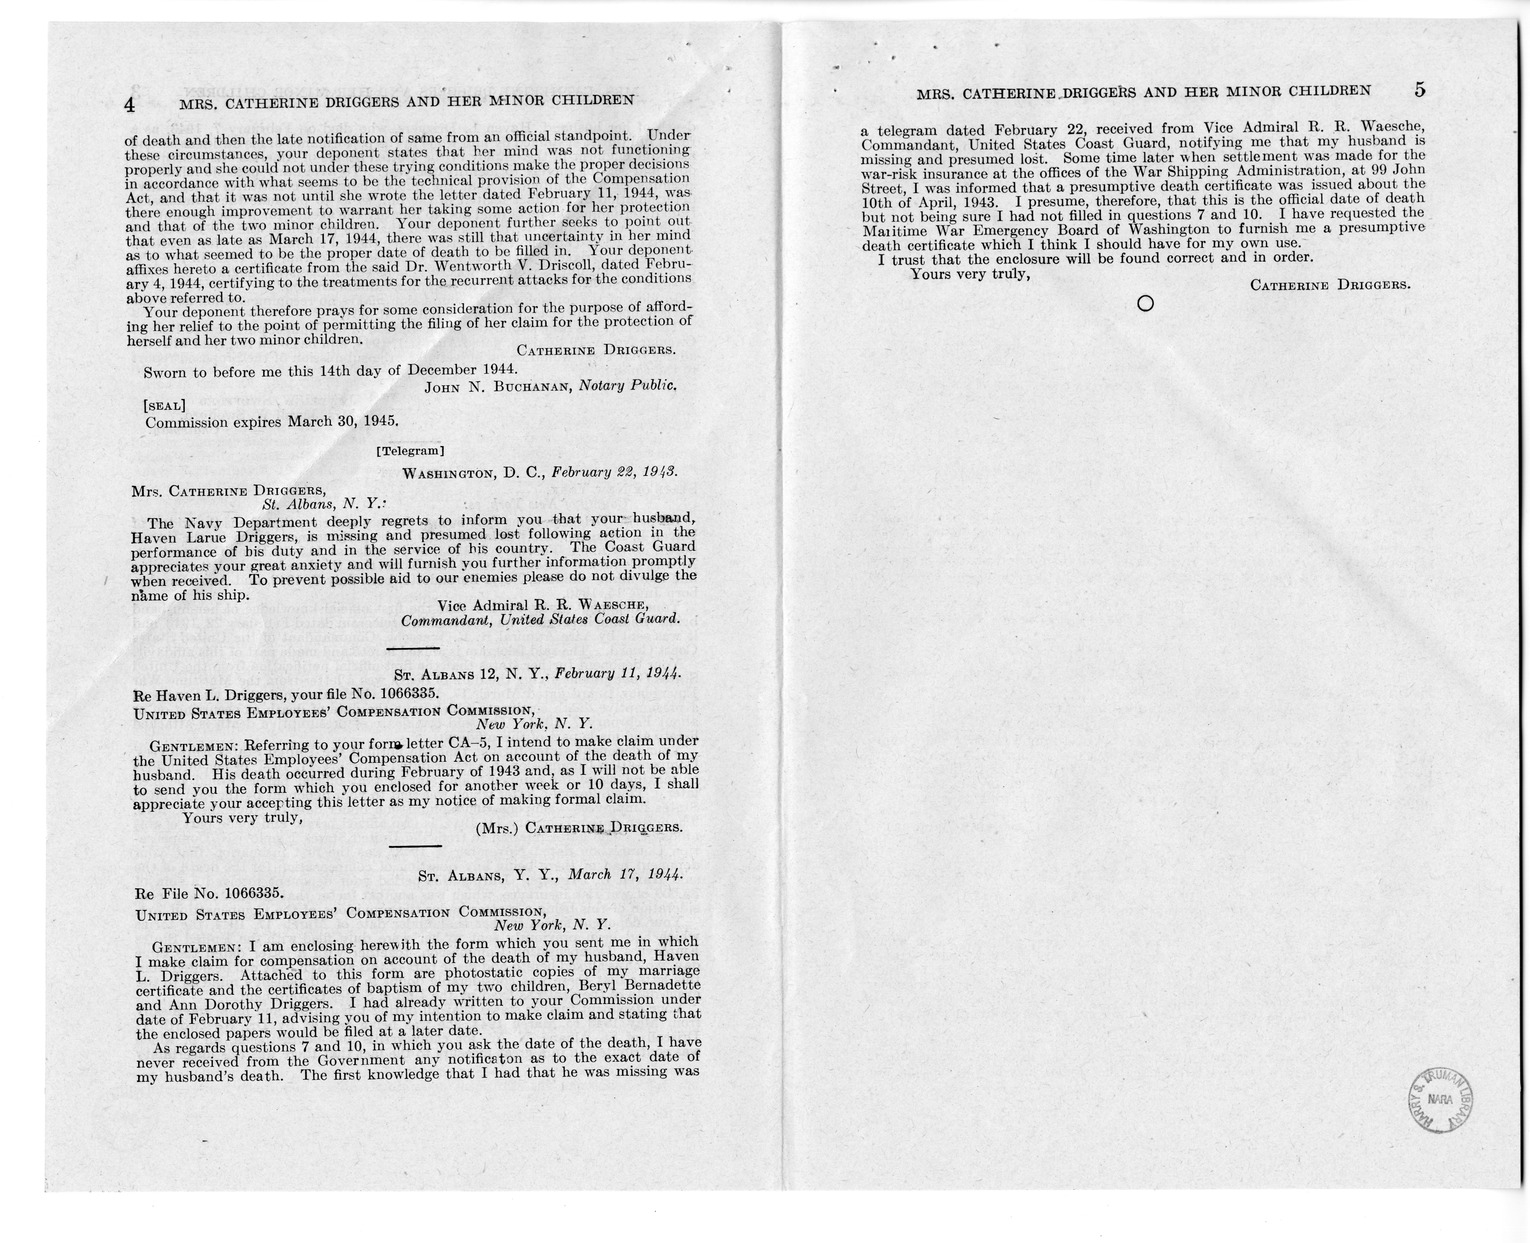 Memorandum from Frederick J. Bailey to M. C. Latta, H.R. 801, For the Relief of Mrs. Catherine Driggers and Her Minor Children, with Attachments